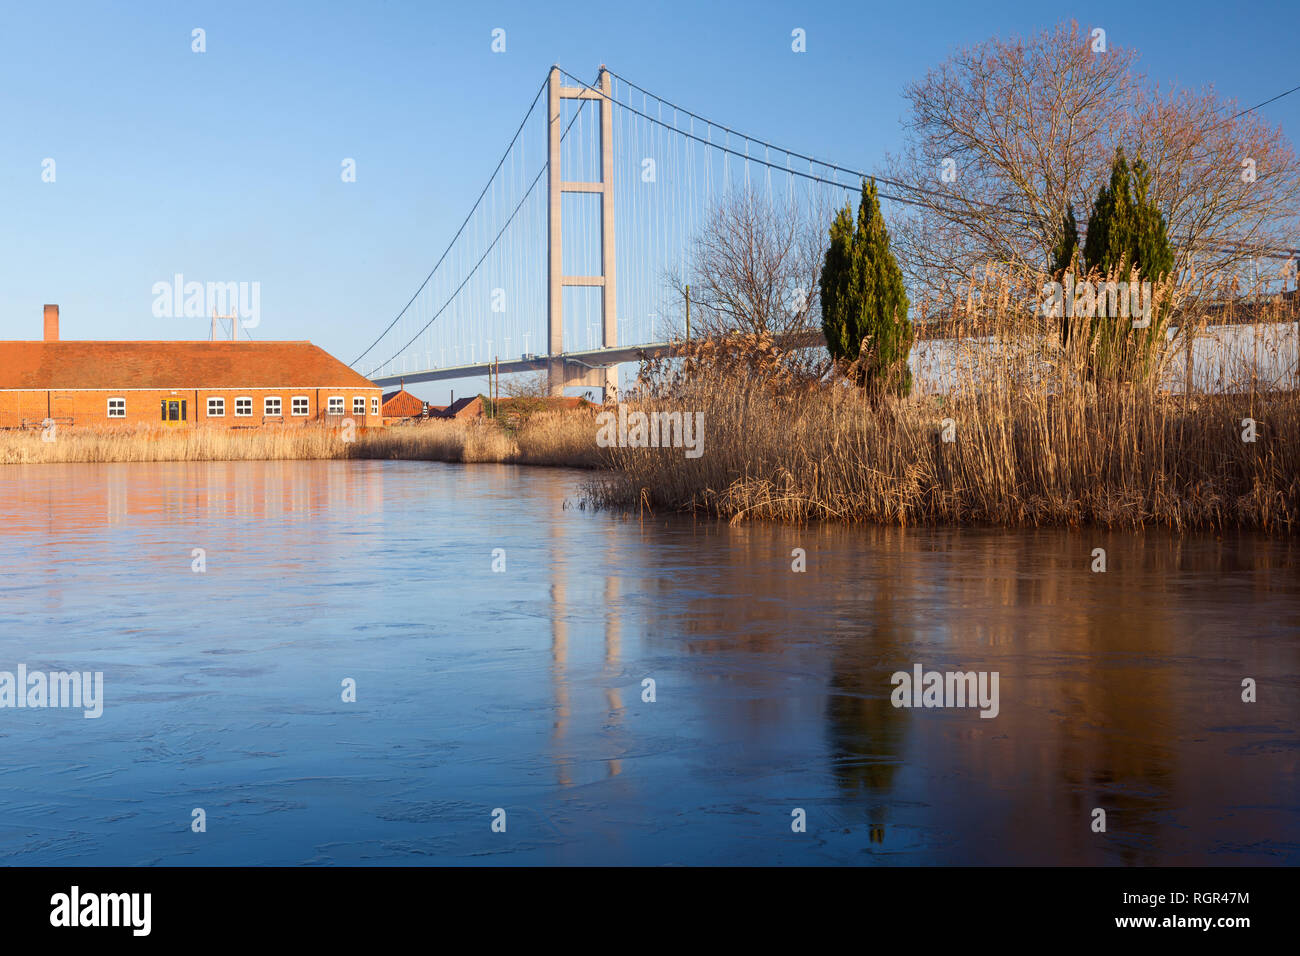 The Old Tile Works and Humber Bridge at Barton upon Humber, North Lincolnshire, UK Stock Photo